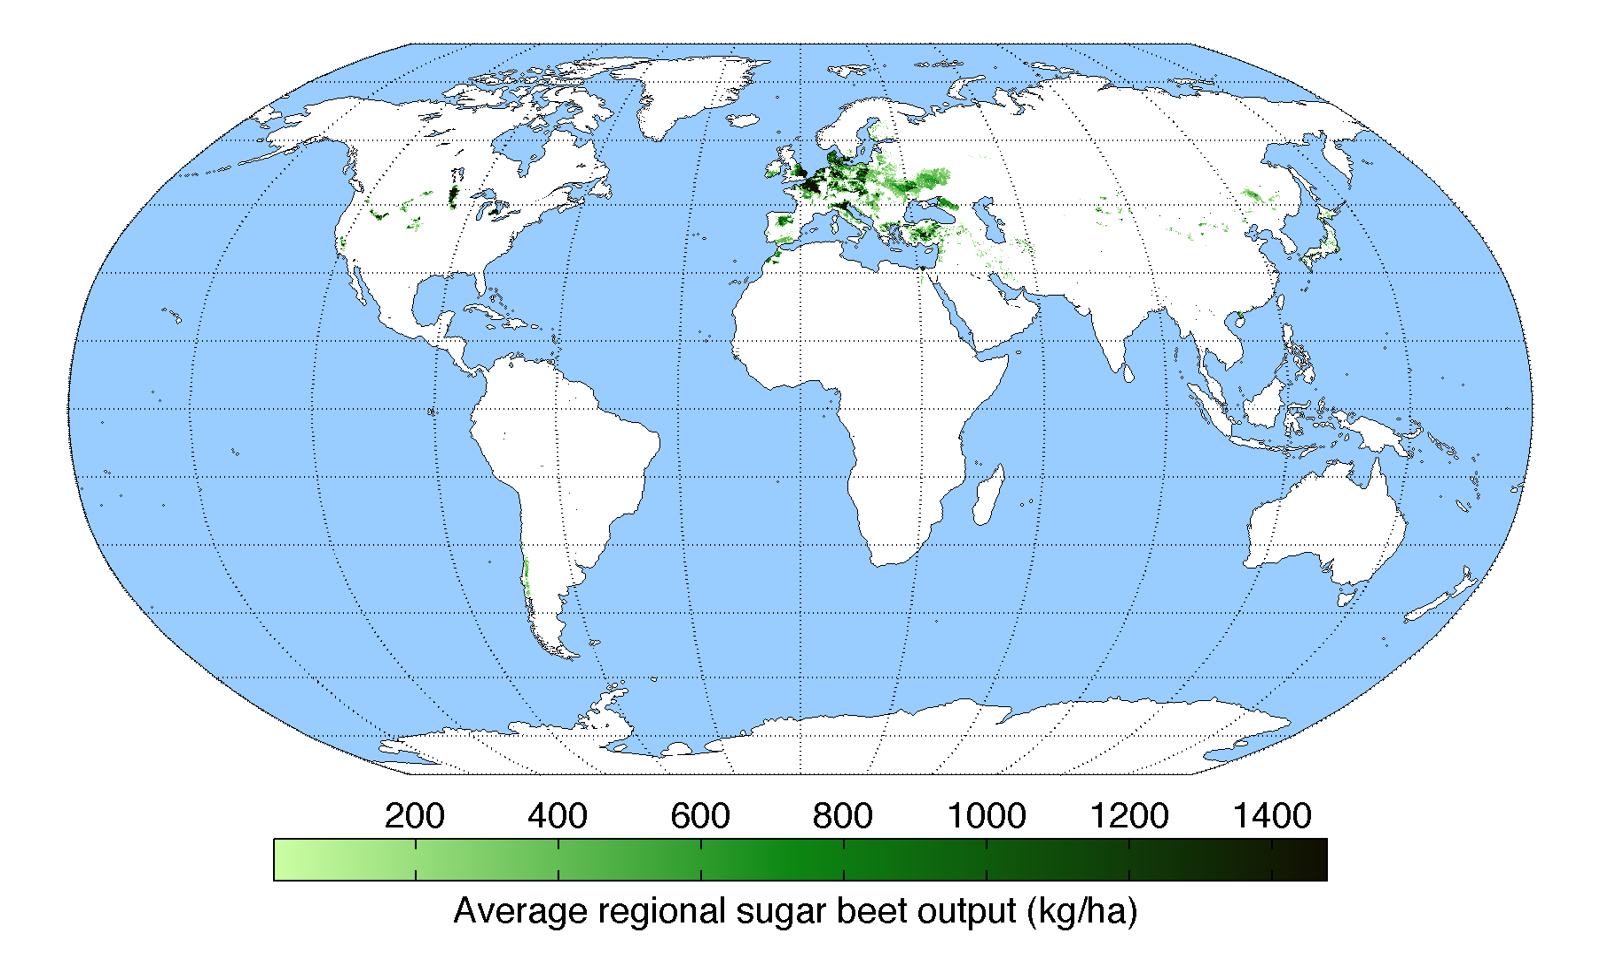 world map showing sugar beet production concentrated in Europe with some production in rural United States